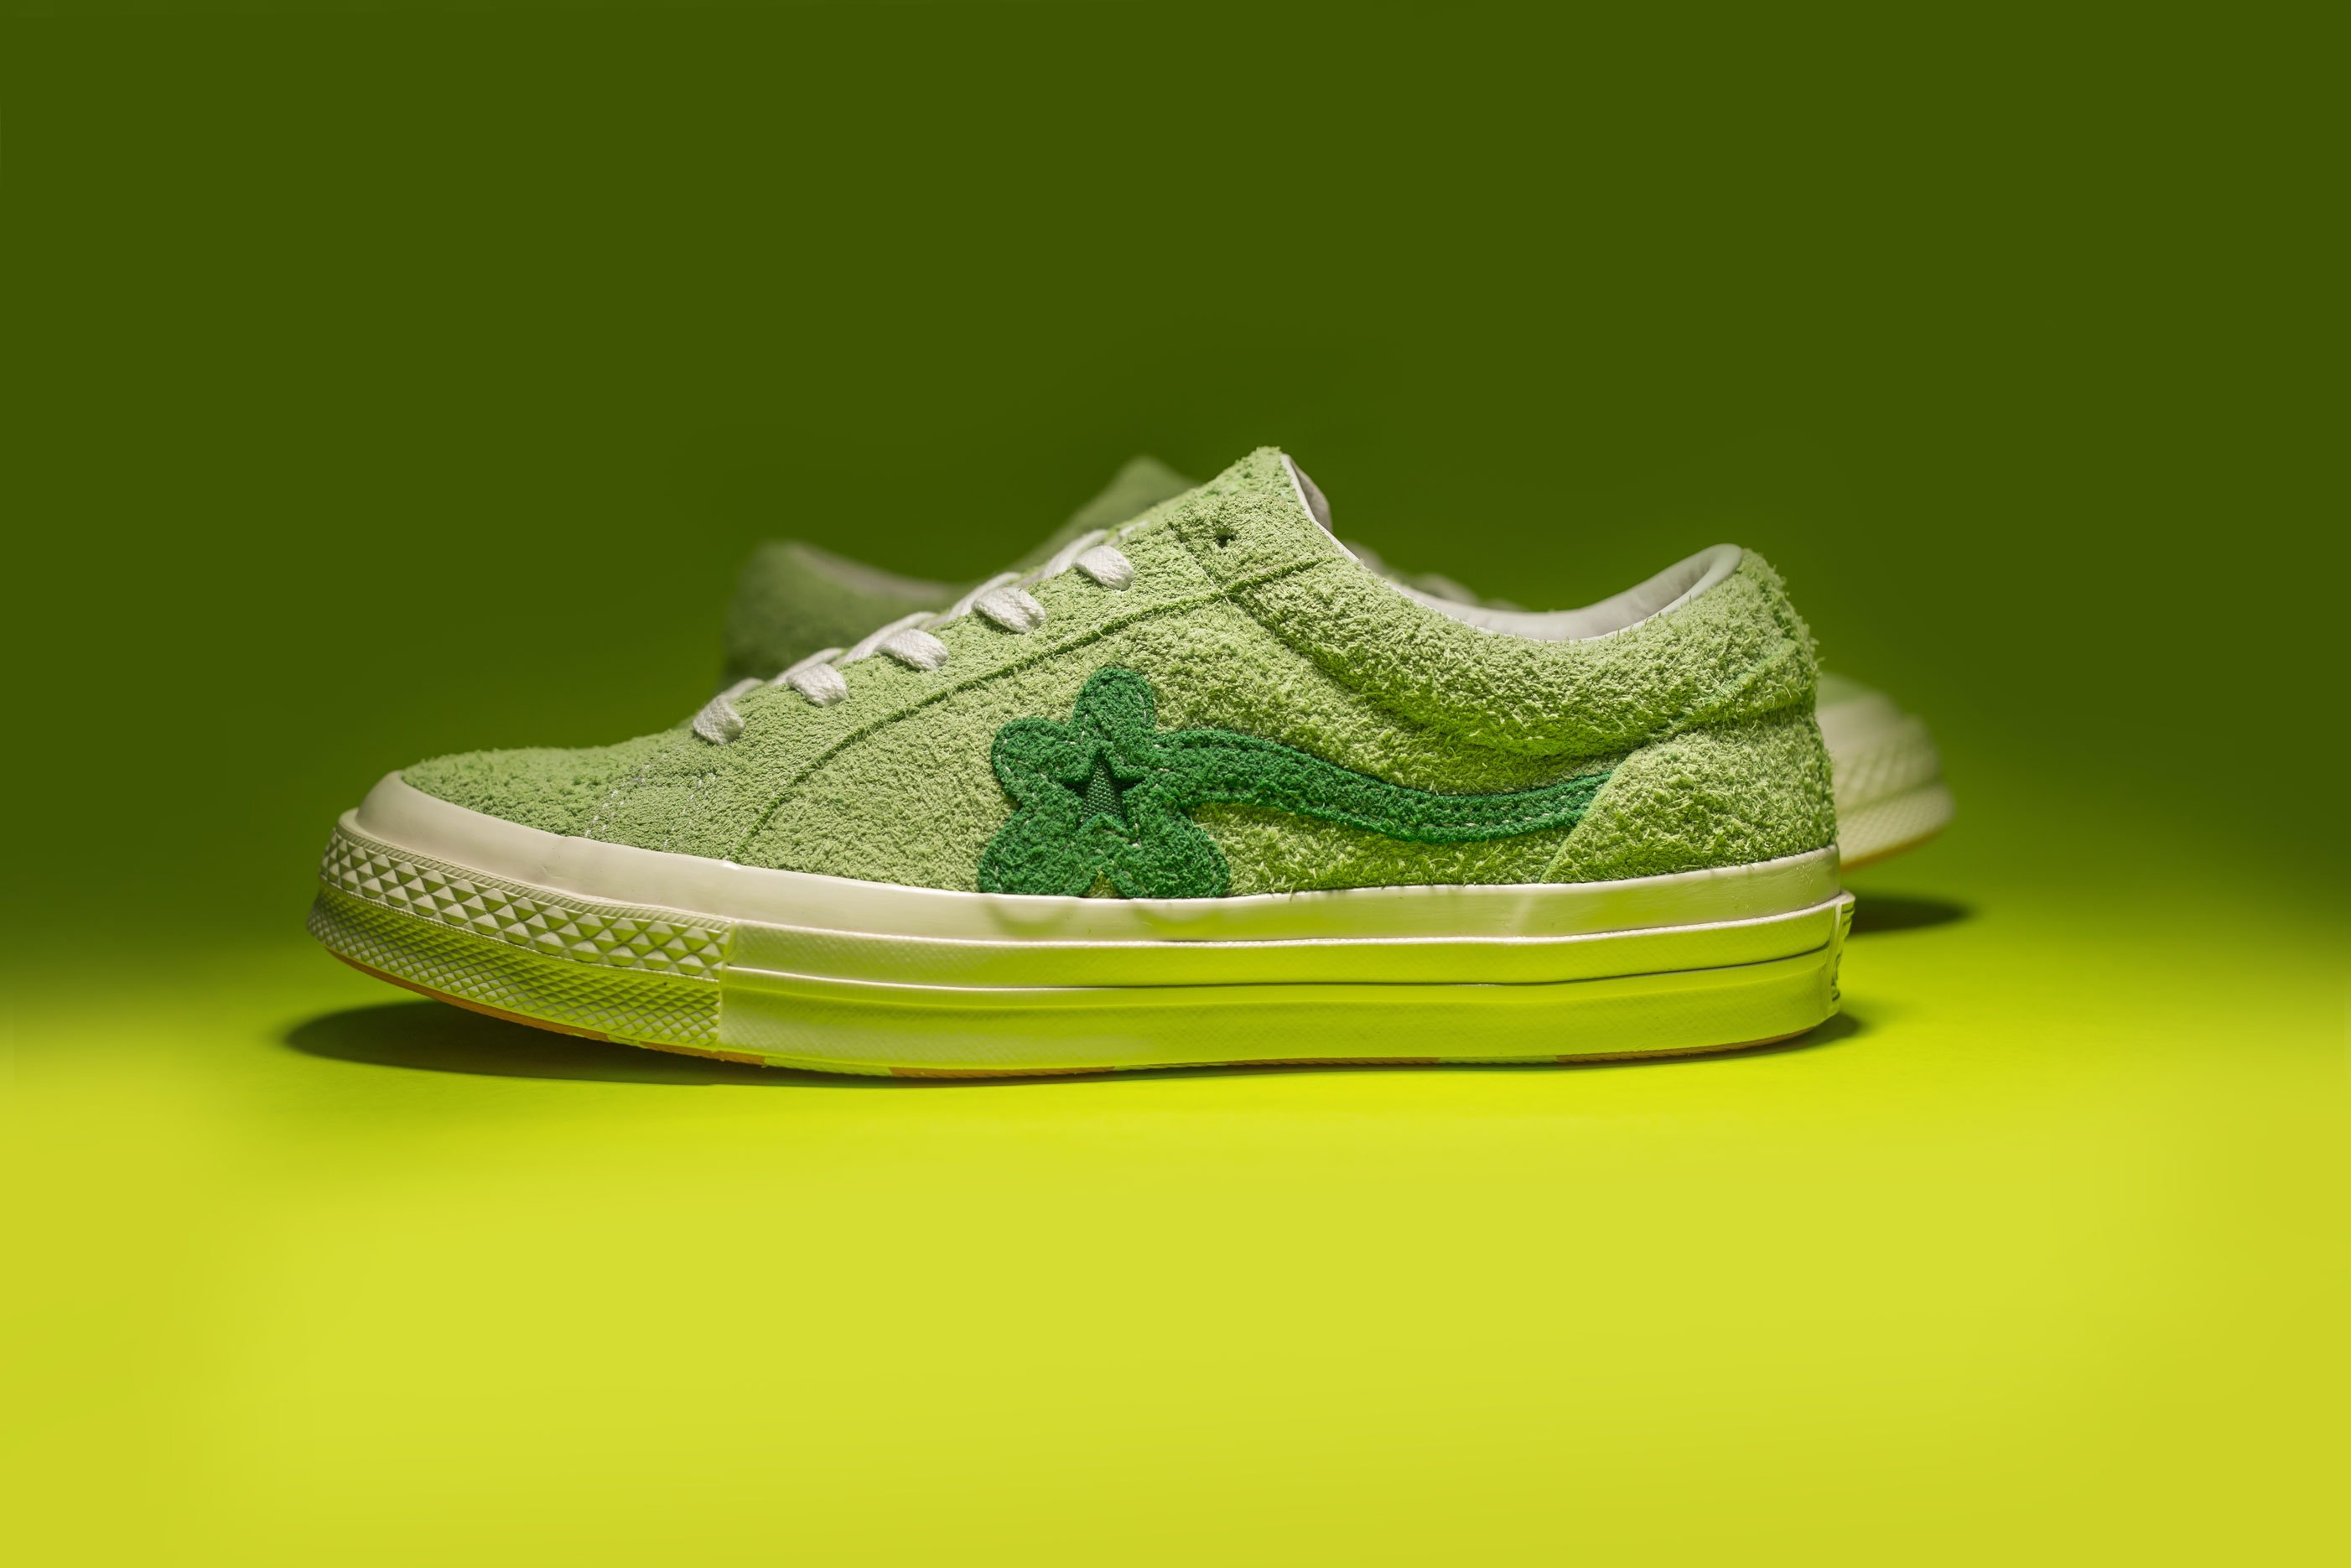 CROSSOVER on Twitter: "Converse x GOLF le FLEUR One 'Jade Lime' will be launching tomorrow 18 Jan, 10AM at #CROSSOVER Flagship City Square and Pyramid store. #converse #GOLFleFLEUR #crossoverconceptstore https://t.co/k9U0Bmbu60"